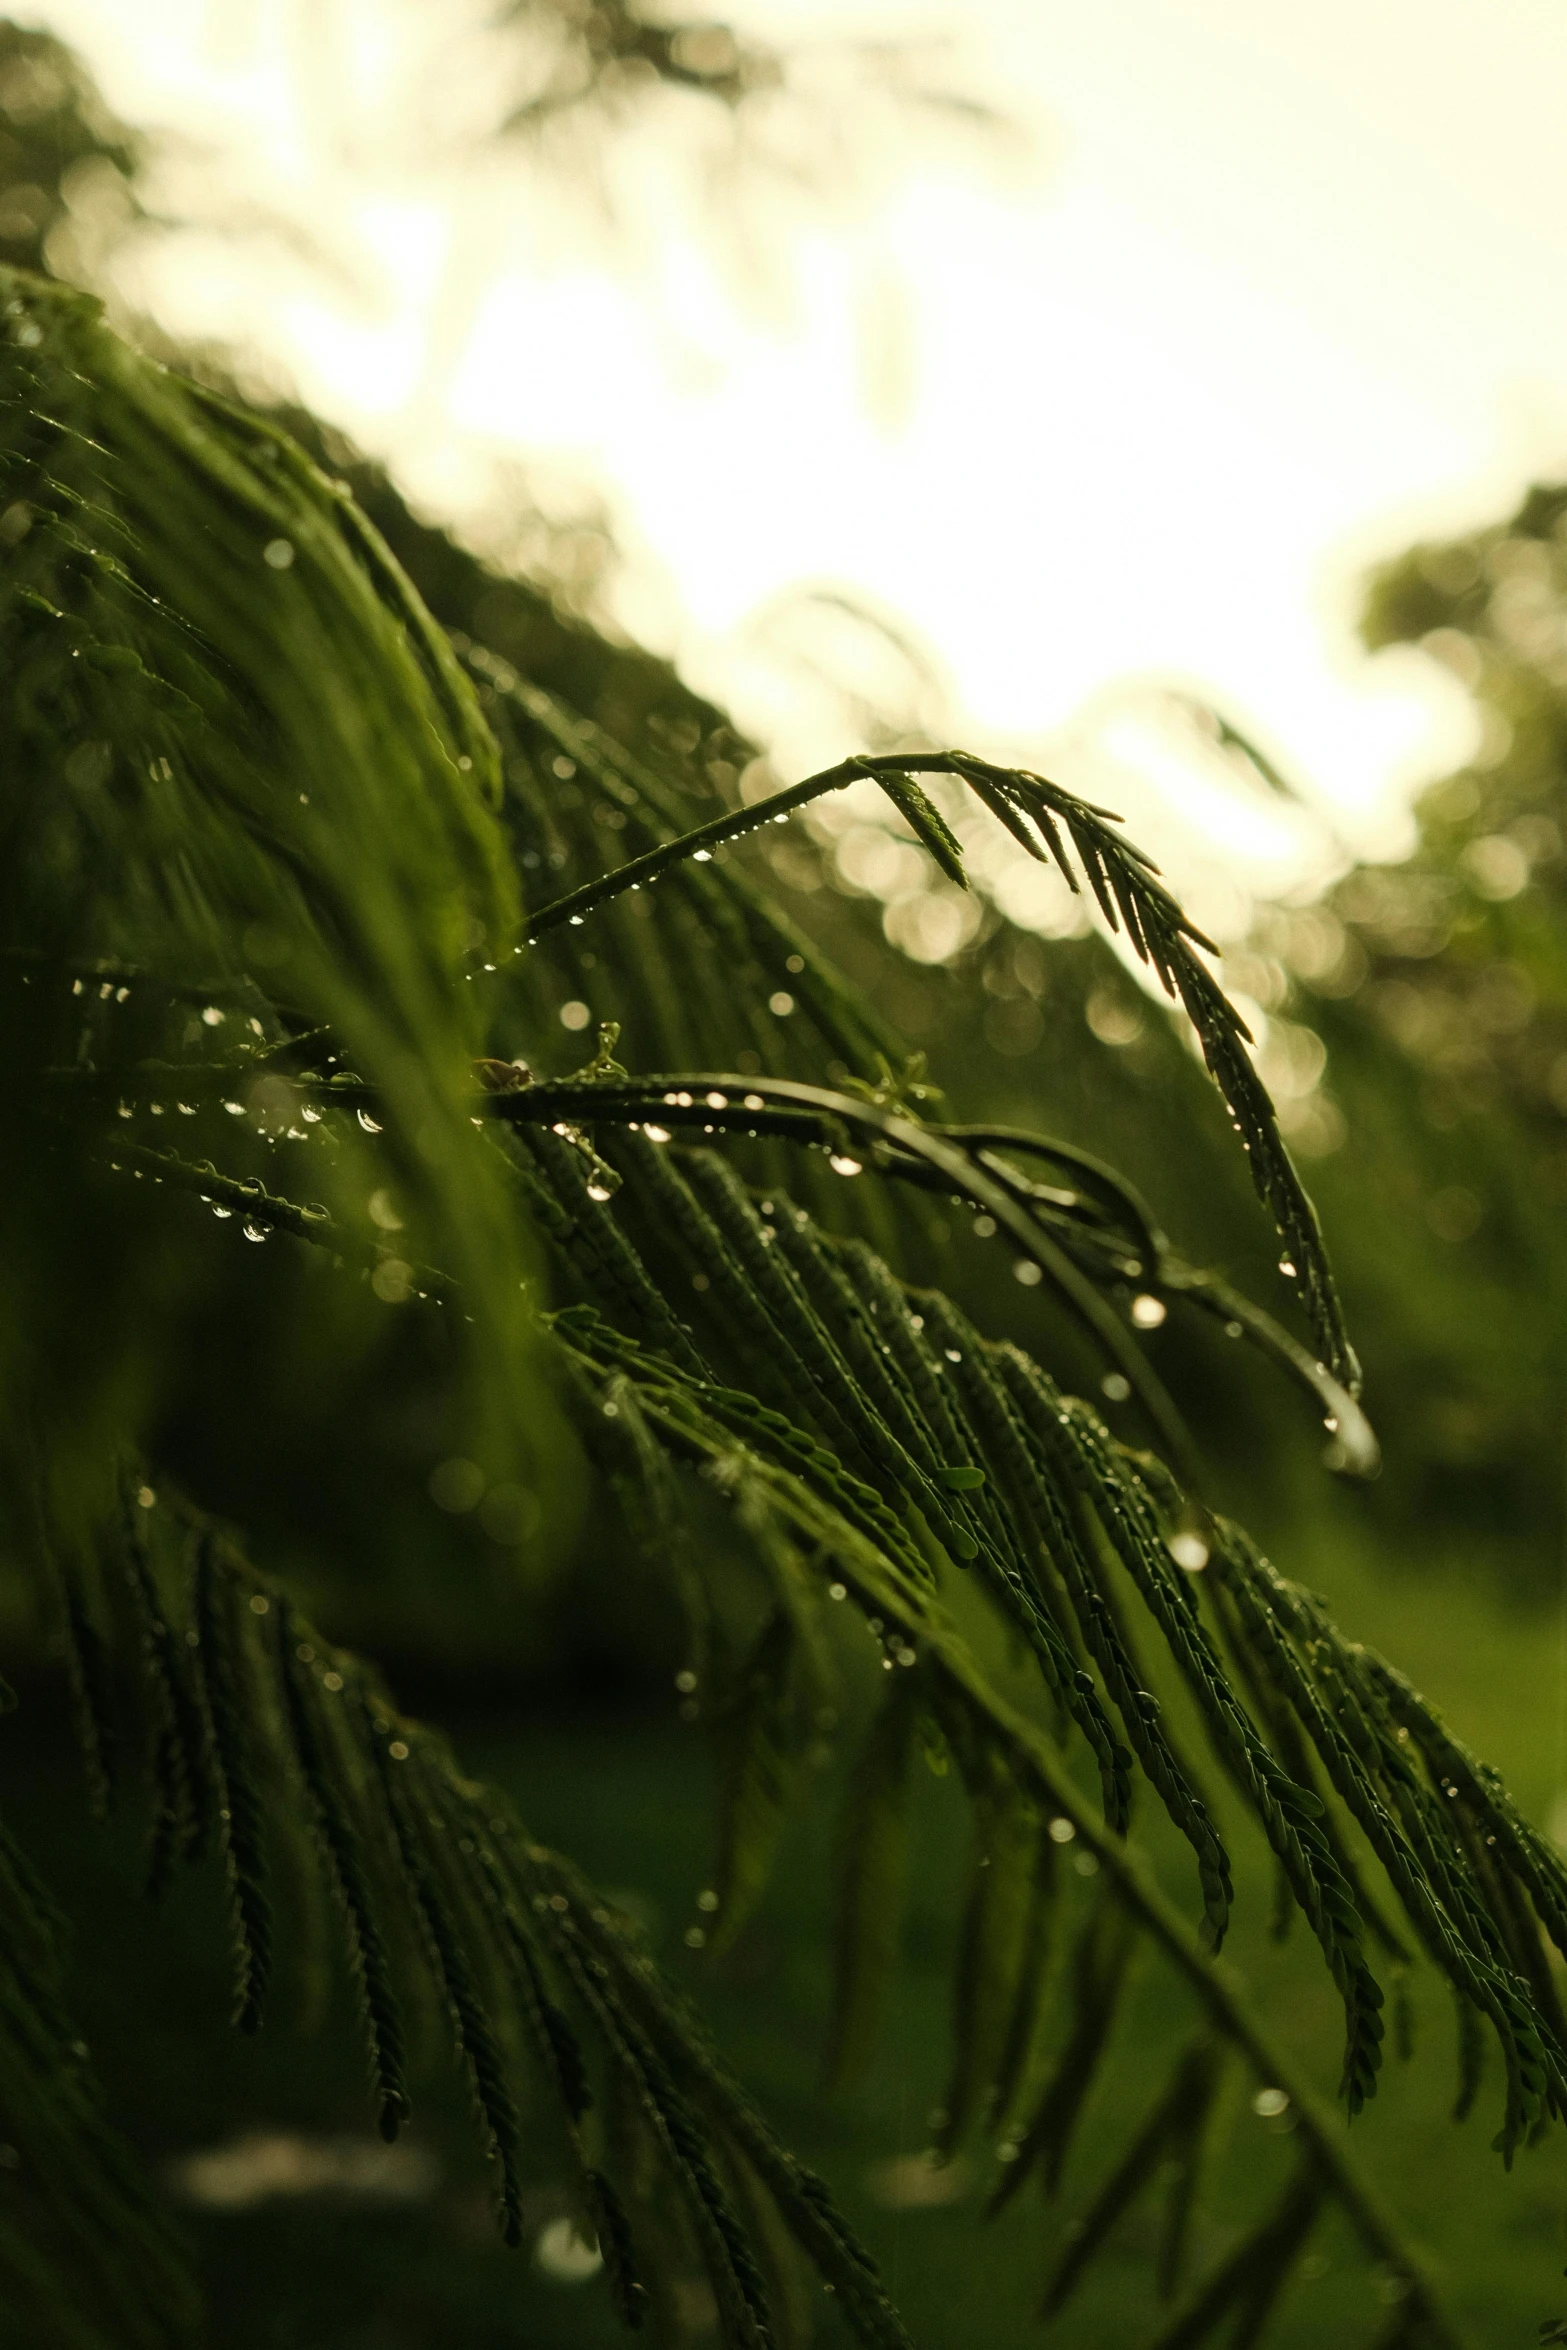 trees in a green field and water droplets